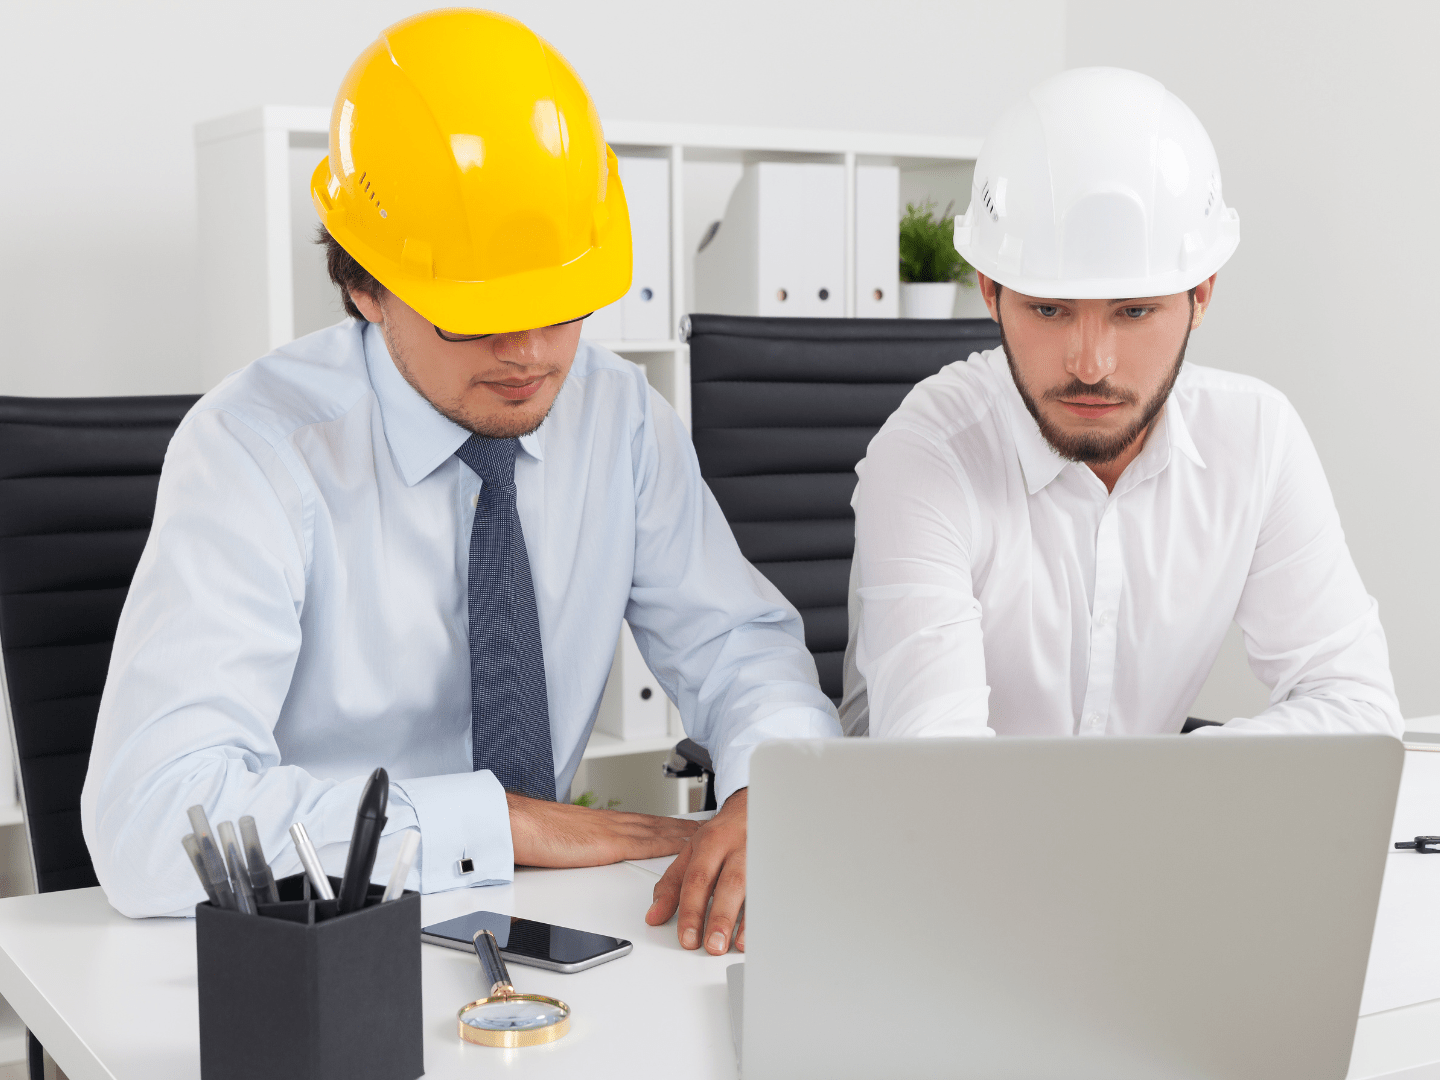  Accounting Software for Construction Companies: Building Financial Stability Alongside Physical Structures